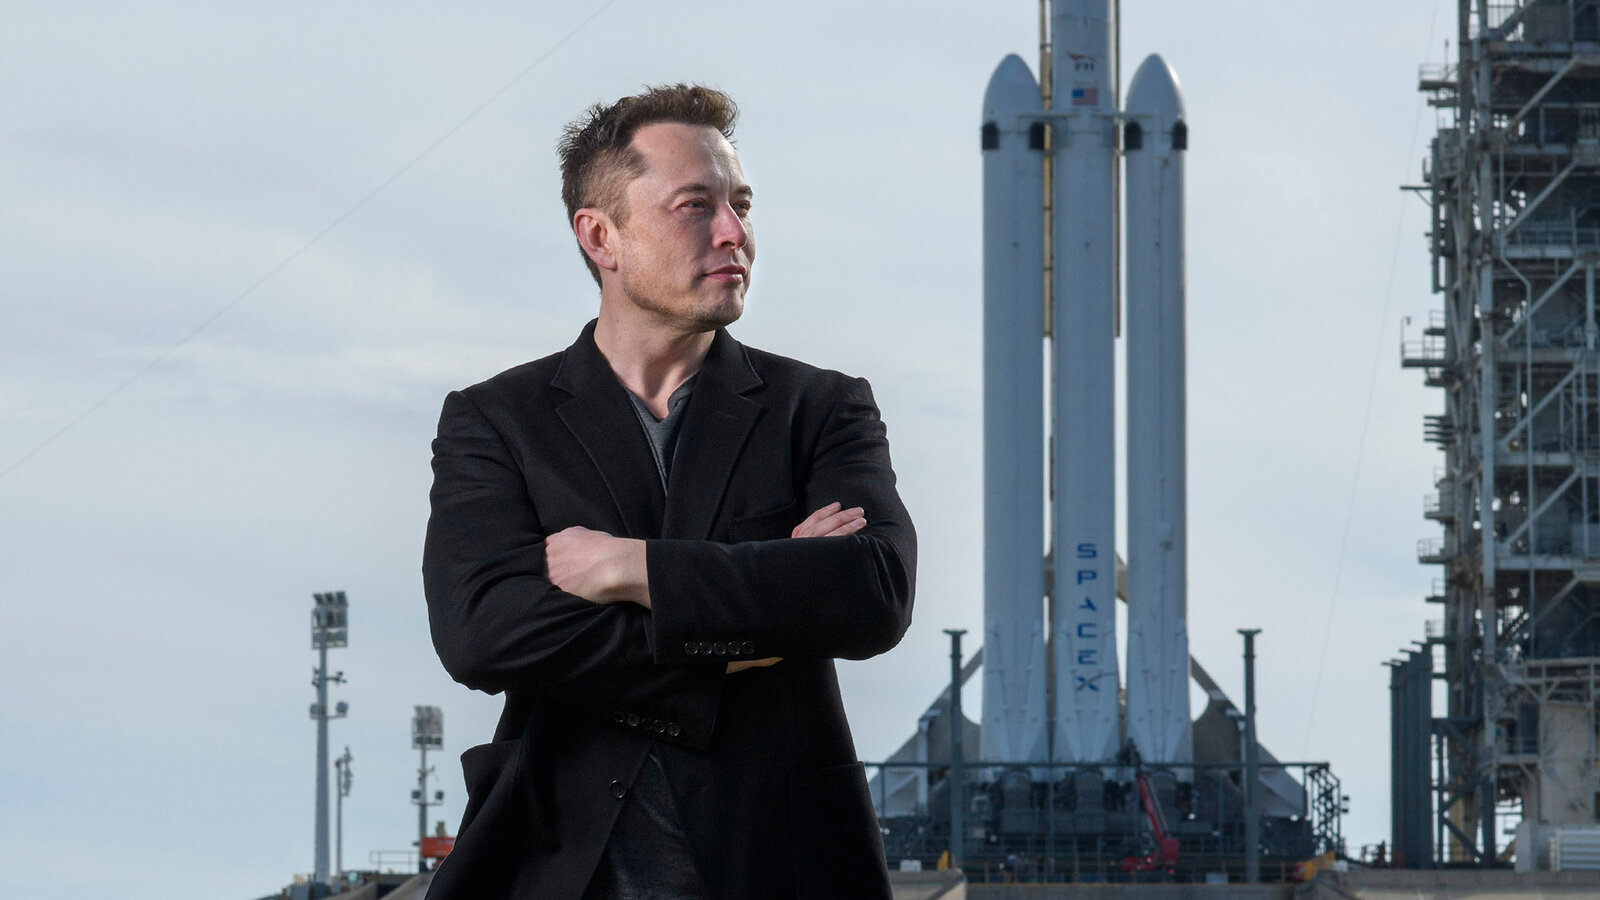 Elon Musk Says Jeff Bezos Should Spend ‘less time in the hot tub’ as Blue Origin Falls Behind SpaceX